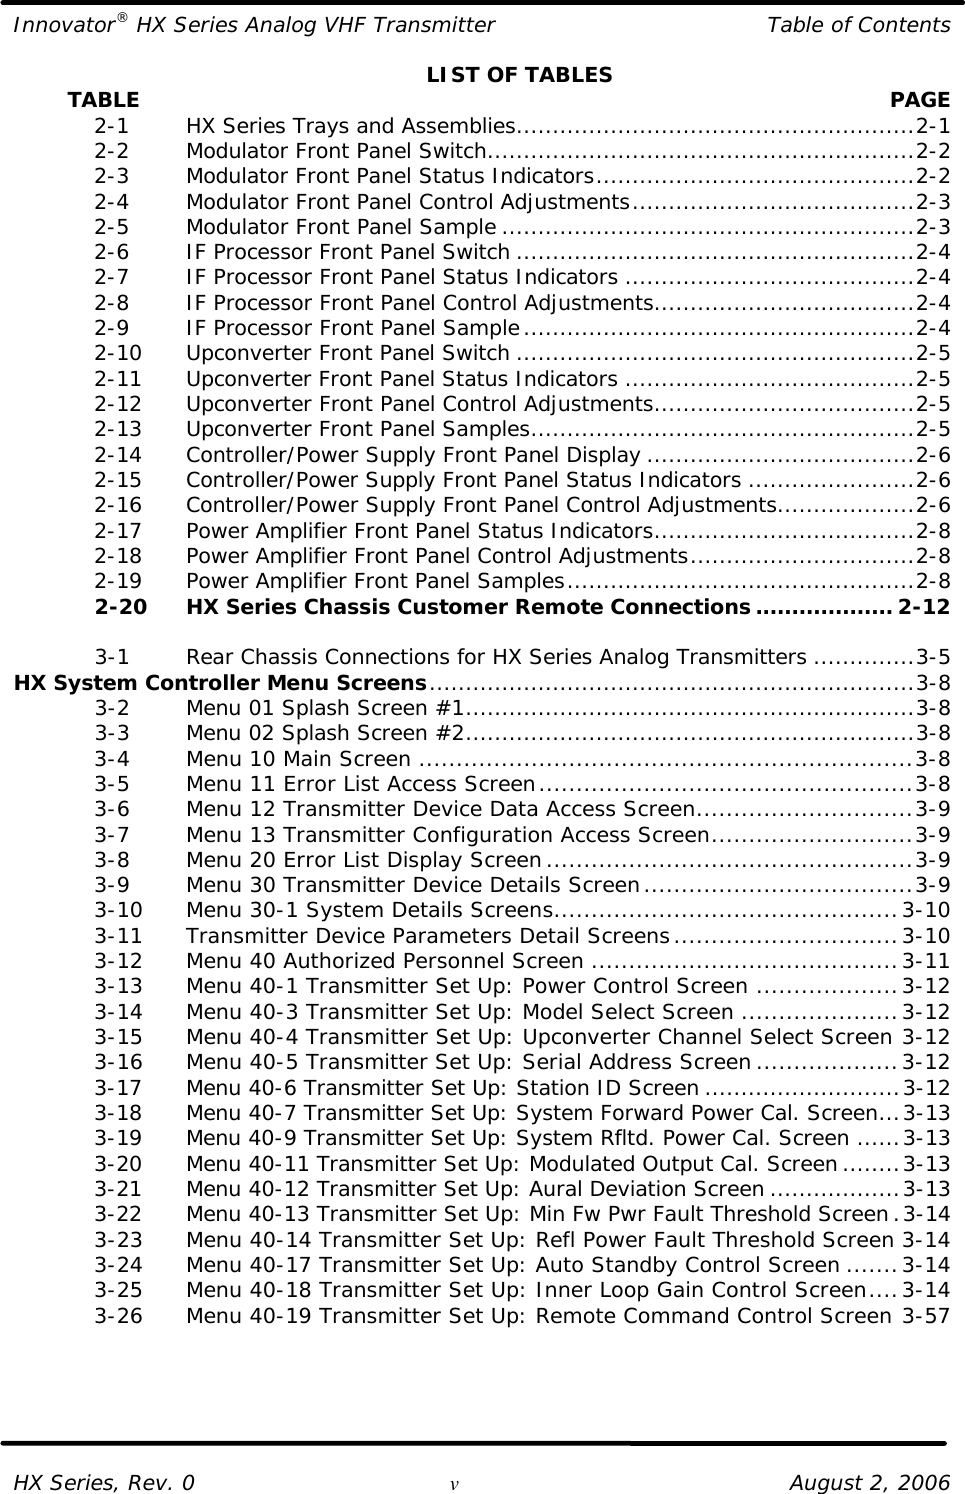 Innovator® HX Series Analog VHF Transmitter Table of Contents  HX Series, Rev. 0 v August 2, 2006 LIST OF TABLES         TABLE  PAGE  2-1   HX Series Trays and Assemblies.......................................................2-1  2-2   Modulator Front Panel Switch...........................................................2-2  2-3   Modulator Front Panel Status Indicators............................................2-2  2-4   Modulator Front Panel Control Adjustments.......................................2-3  2-5   Modulator Front Panel Sample .........................................................2-3  2-6   IF Processor Front Panel Switch .......................................................2-4  2-7   IF Processor Front Panel Status Indicators ........................................2-4  2-8   IF Processor Front Panel Control Adjustments....................................2-4  2-9   IF Processor Front Panel Sample......................................................2-4  2-10 Upconverter Front Panel Switch .......................................................2-5  2-11 Upconverter Front Panel Status Indicators ........................................2-5  2-12 Upconverter Front Panel Control Adjustments....................................2-5  2-13 Upconverter Front Panel Samples.....................................................2-5  2-14 Controller/Power Supply Front Panel Display .....................................2-6  2-15 Controller/Power Supply Front Panel Status Indicators .......................2-6  2-16 Controller/Power Supply Front Panel Control Adjustments...................2-6  2-17 Power Amplifier Front Panel Status Indicators....................................2-8  2-18 Power Amplifier Front Panel Control Adjustments...............................2-8  2-19 Power Amplifier Front Panel Samples................................................2-8  2-20 HX Series Chassis Customer Remote Connections ................... 2-12   3-1   Rear Chassis Connections for HX Series Analog Transmitters ..............3-5 HX System Controller Menu Screens...................................................................3-8  3-2   Menu 01 Splash Screen #1..............................................................3-8  3-3   Menu 02 Splash Screen #2..............................................................3-8  3-4   Menu 10 Main Screen ..................................................................3-8  3-5   Menu 11 Error List Access Screen..................................................3-8  3-6   Menu 12 Transmitter Device Data Access Screen.............................3-9  3-7   Menu 13 Transmitter Configuration Access Screen...........................3-9  3-8   Menu 20 Error List Display Screen.................................................3-9  3-9   Menu 30 Transmitter Device Details Screen....................................3-9  3-10 Menu 30-1 System Details Screens..............................................3-10  3-11 Transmitter Device Parameters Detail Screens..............................3-10  3-12 Menu 40 Authorized Personnel Screen .........................................3-11  3-13 Menu 40-1 Transmitter Set Up: Power Control Screen ...................3-12  3-14 Menu 40-3 Transmitter Set Up: Model Select Screen .....................3-12  3-15 Menu 40-4 Transmitter Set Up: Upconverter Channel Select Screen 3-12  3-16 Menu 40-5 Transmitter Set Up: Serial Address Screen ...................3-12  3-17 Menu 40-6 Transmitter Set Up: Station ID Screen ...........................3-12  3-18 Menu 40-7 Transmitter Set Up: System Forward Power Cal. Screen...3-13  3-19 Menu 40-9 Transmitter Set Up: System Rfltd. Power Cal. Screen ......3-13  3-20 Menu 40-11 Transmitter Set Up: Modulated Output Cal. Screen ........3-13  3-21 Menu 40-12 Transmitter Set Up: Aural Deviation Screen ..................3-13  3-22 Menu 40-13 Transmitter Set Up: Min Fw Pwr Fault Threshold Screen.3-14  3-23 Menu 40-14 Transmitter Set Up: Refl Power Fault Threshold Screen 3-14  3-24 Menu 40-17 Transmitter Set Up: Auto Standby Control Screen .......3-14  3-25 Menu 40-18 Transmitter Set Up: Inner Loop Gain Control Screen....3-14  3-26 Menu 40-19 Transmitter Set Up: Remote Command Control Screen 3-57  